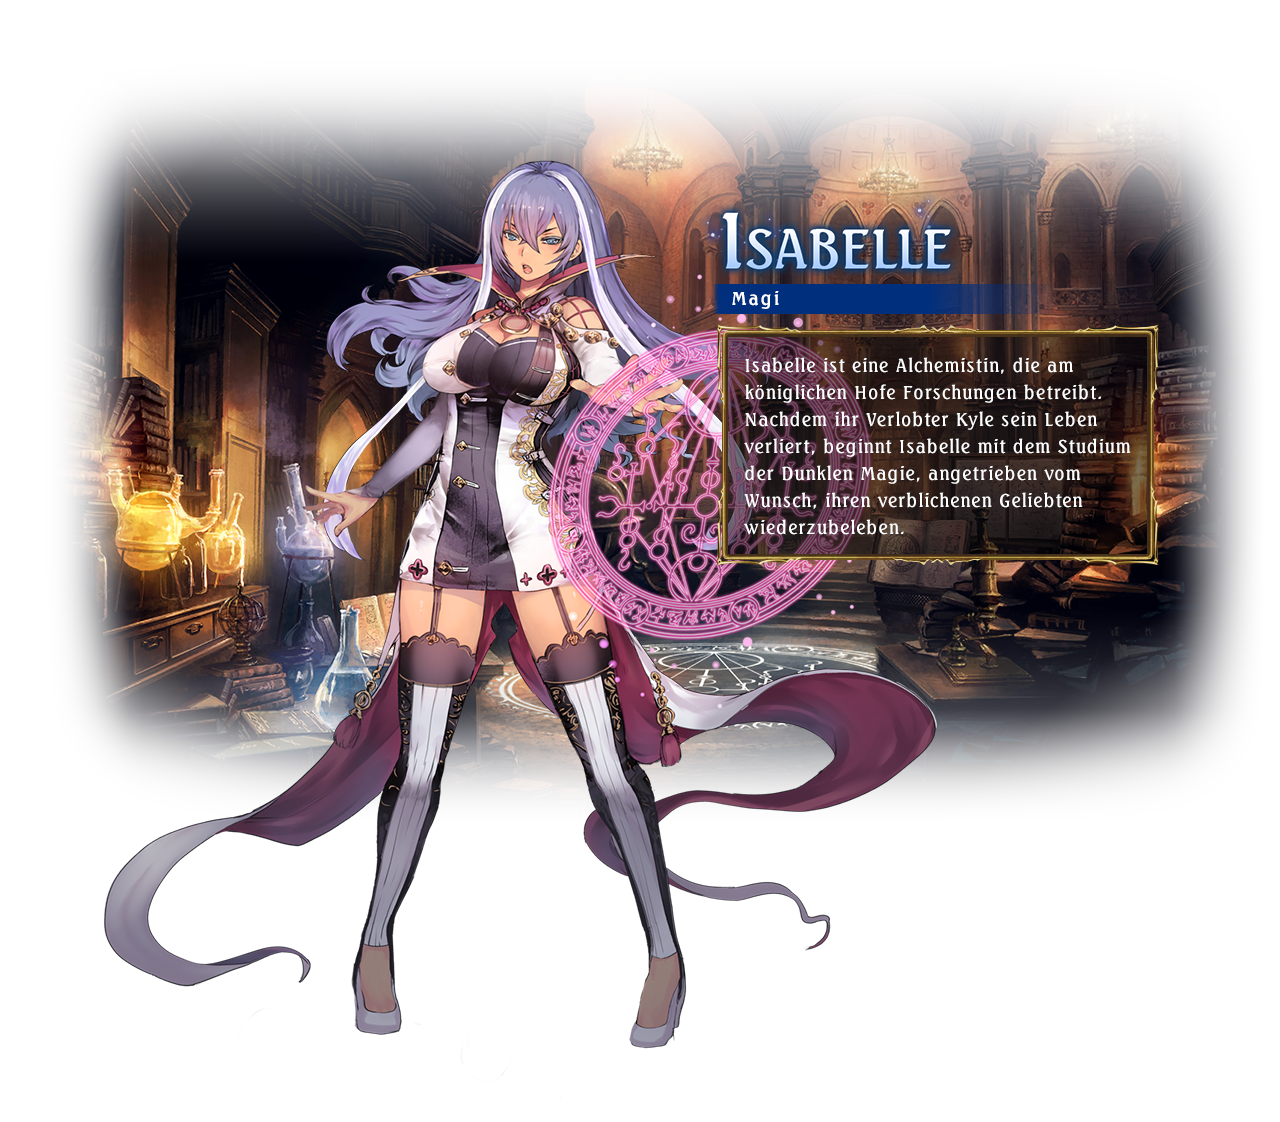 Isabelle / Class: Runecraft / Isabelle is an alchemical researcher. The tragic death of her beloved fiancé made her obsessed with the idea of resurrecting the dead.